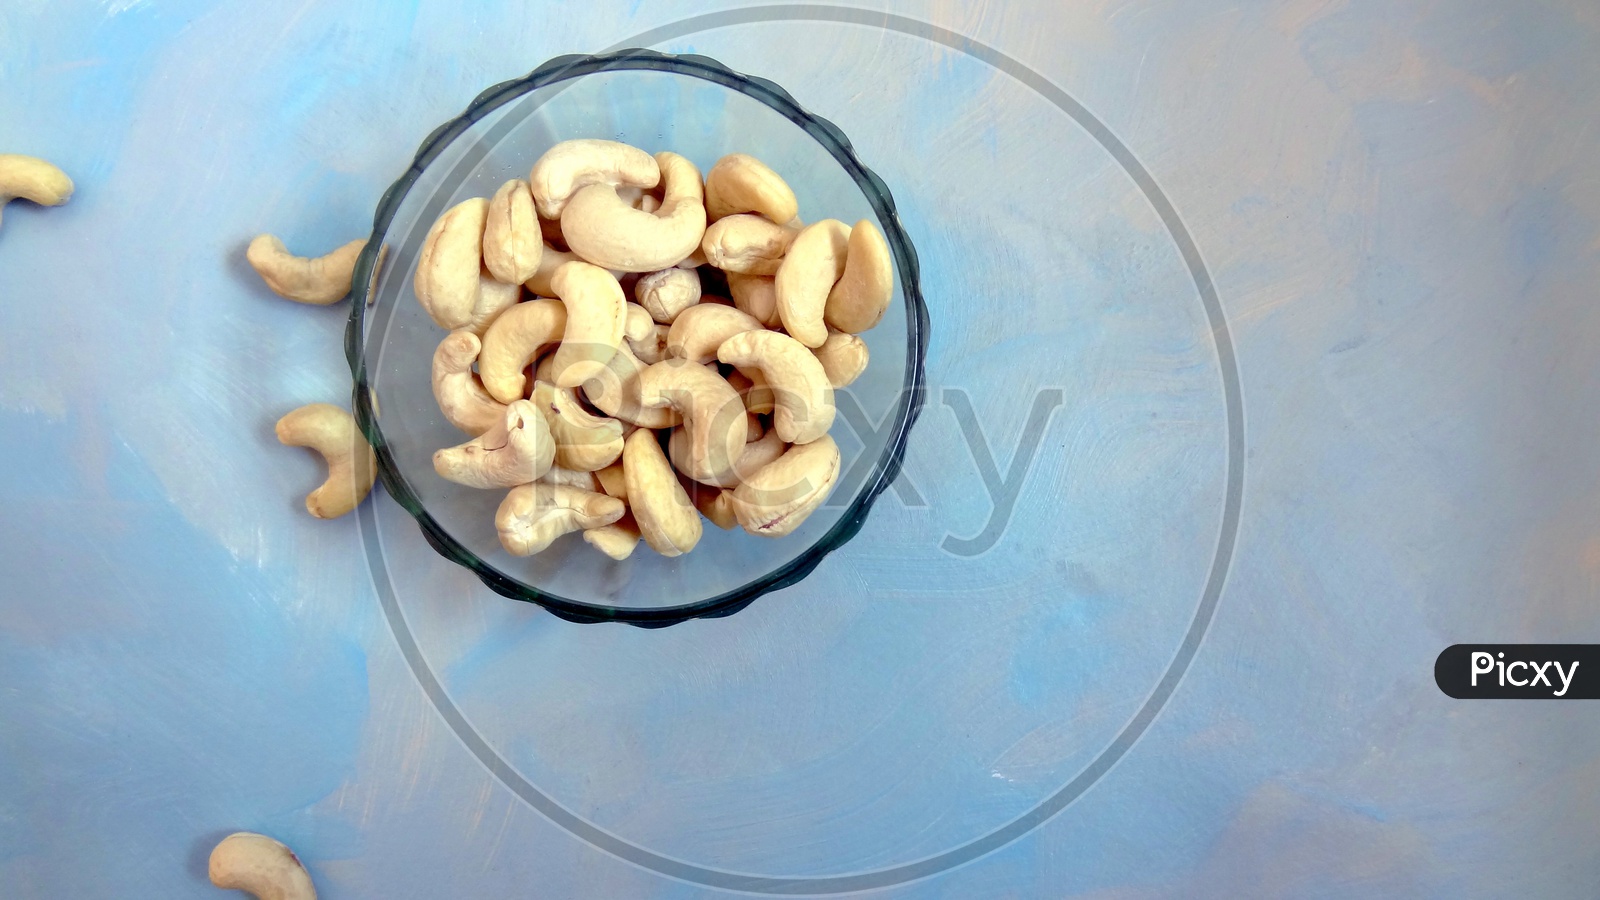 Cashew nuts with blue background!